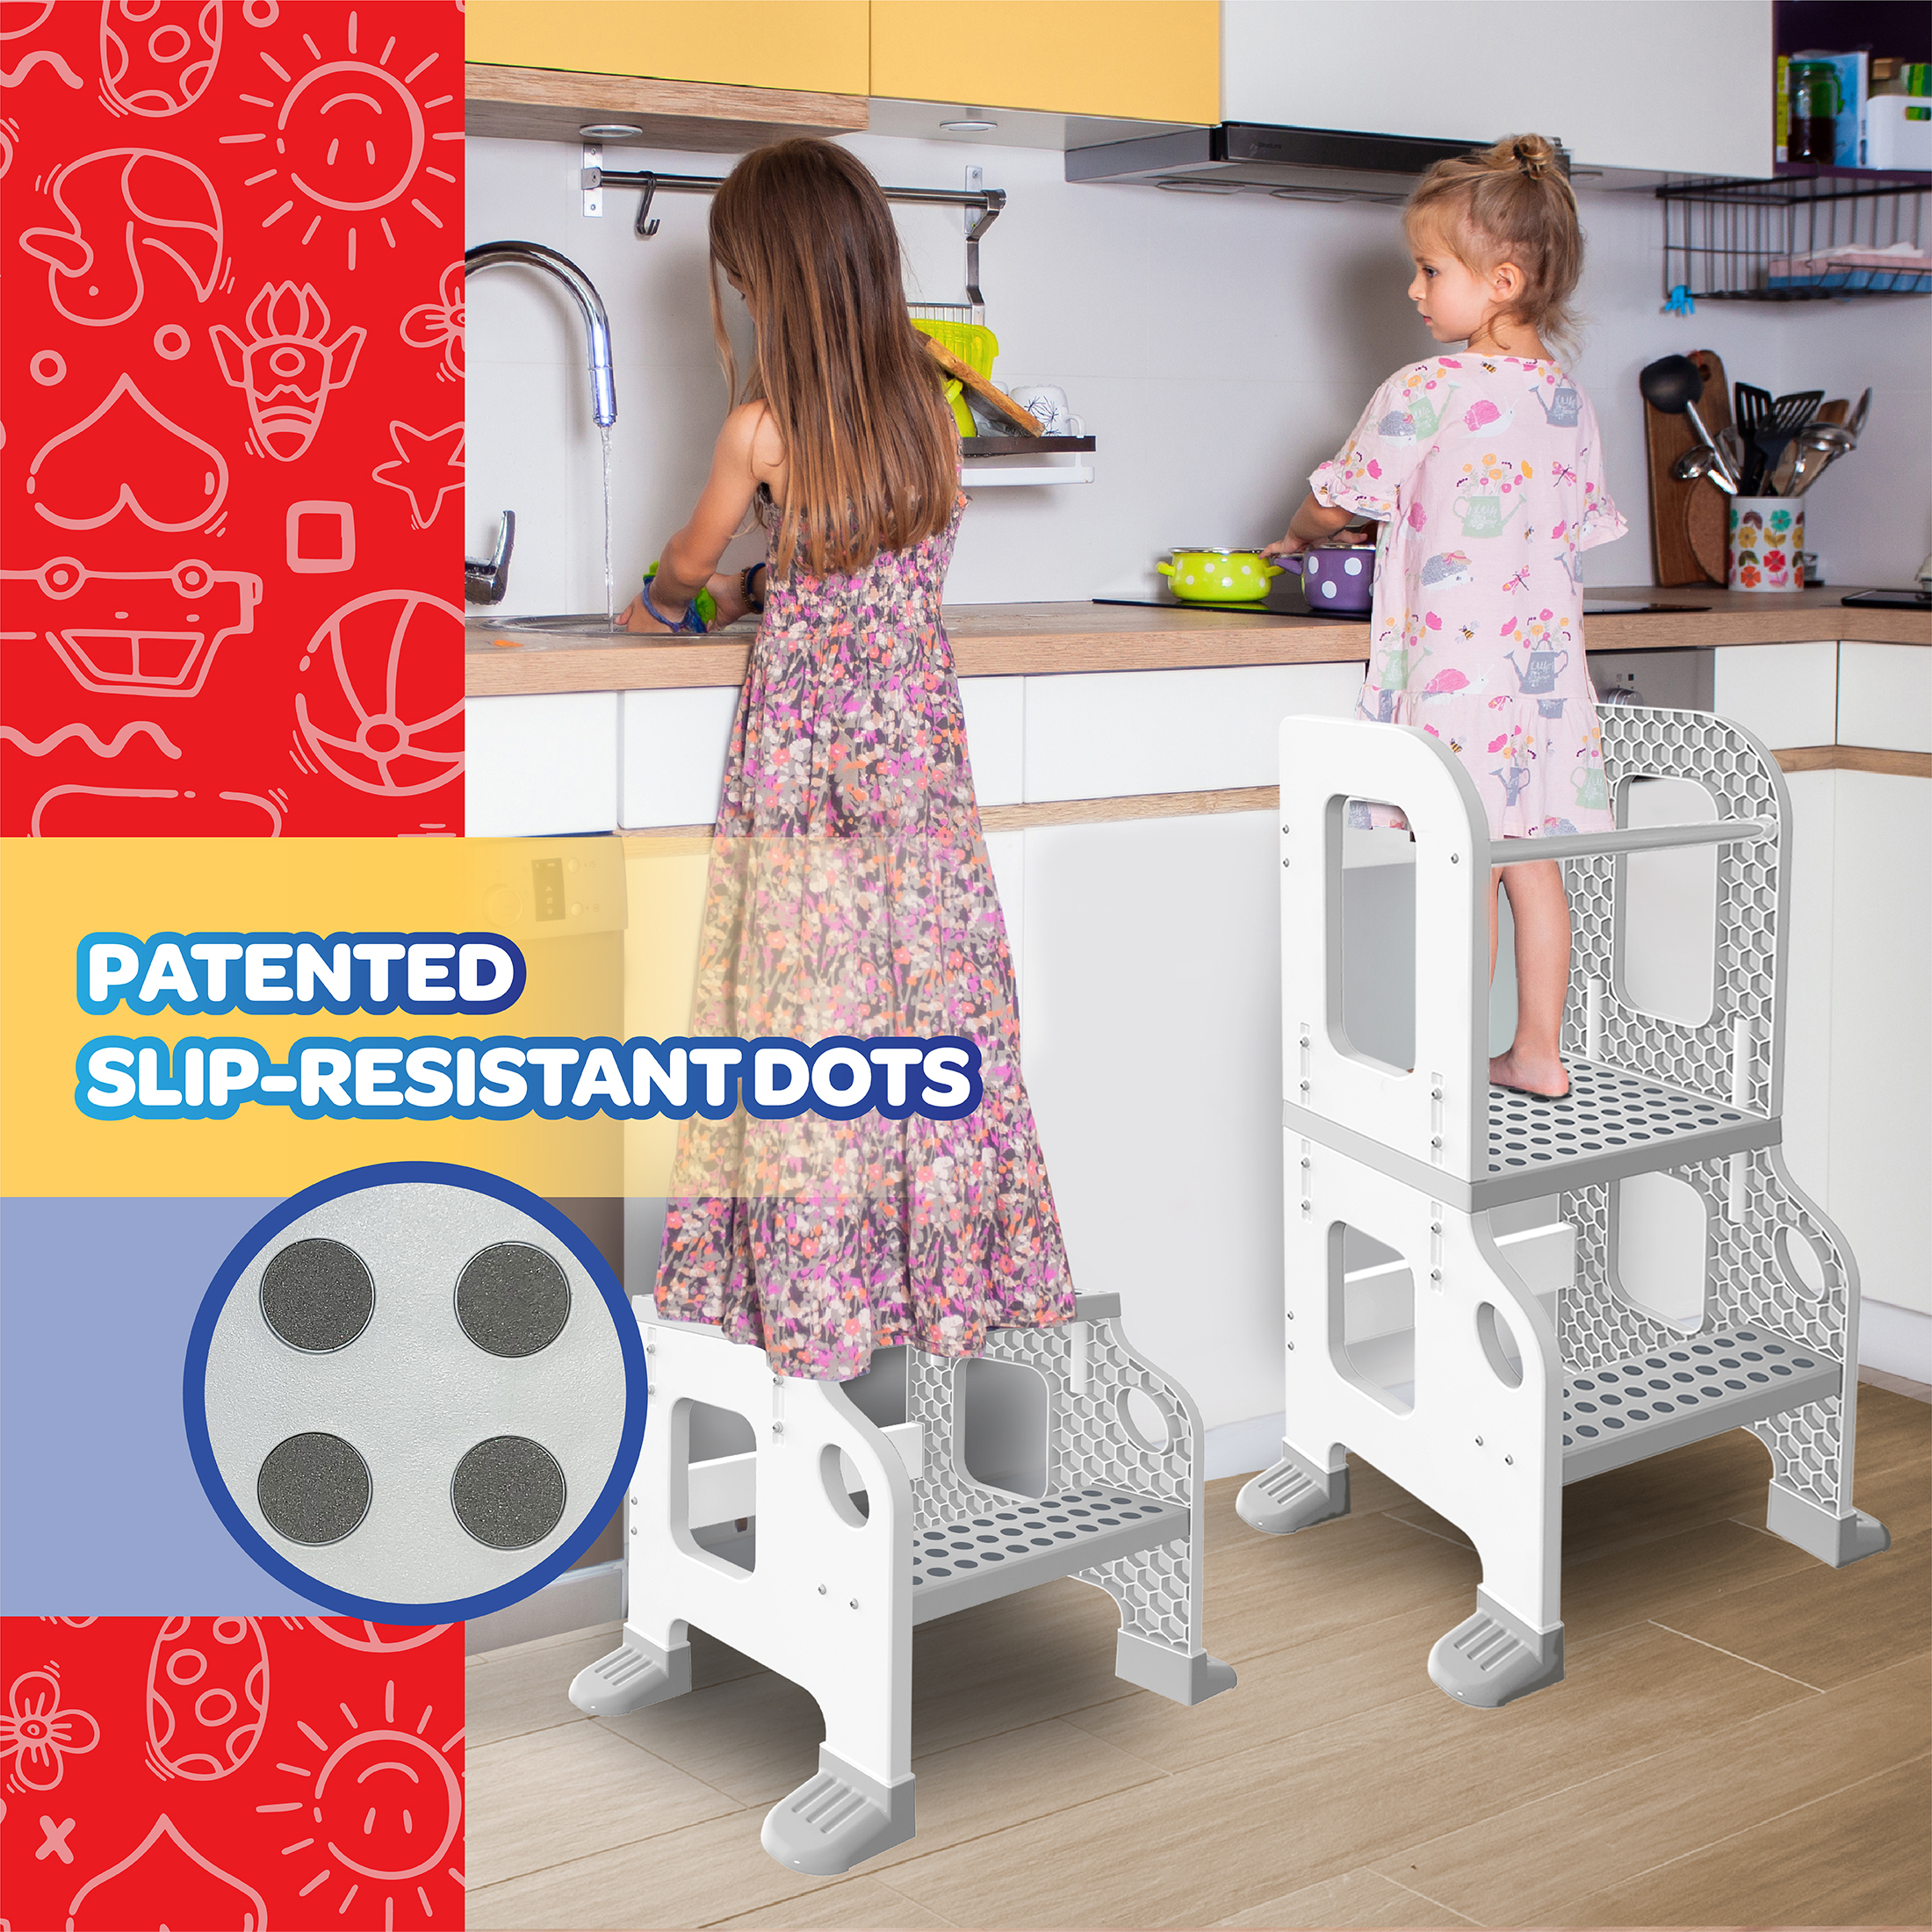 CORE PACIFIC Kitchen Buddy 2-in-1 Stool for Ages 1-3 safe up to 100 lbs. - image 5 of 7